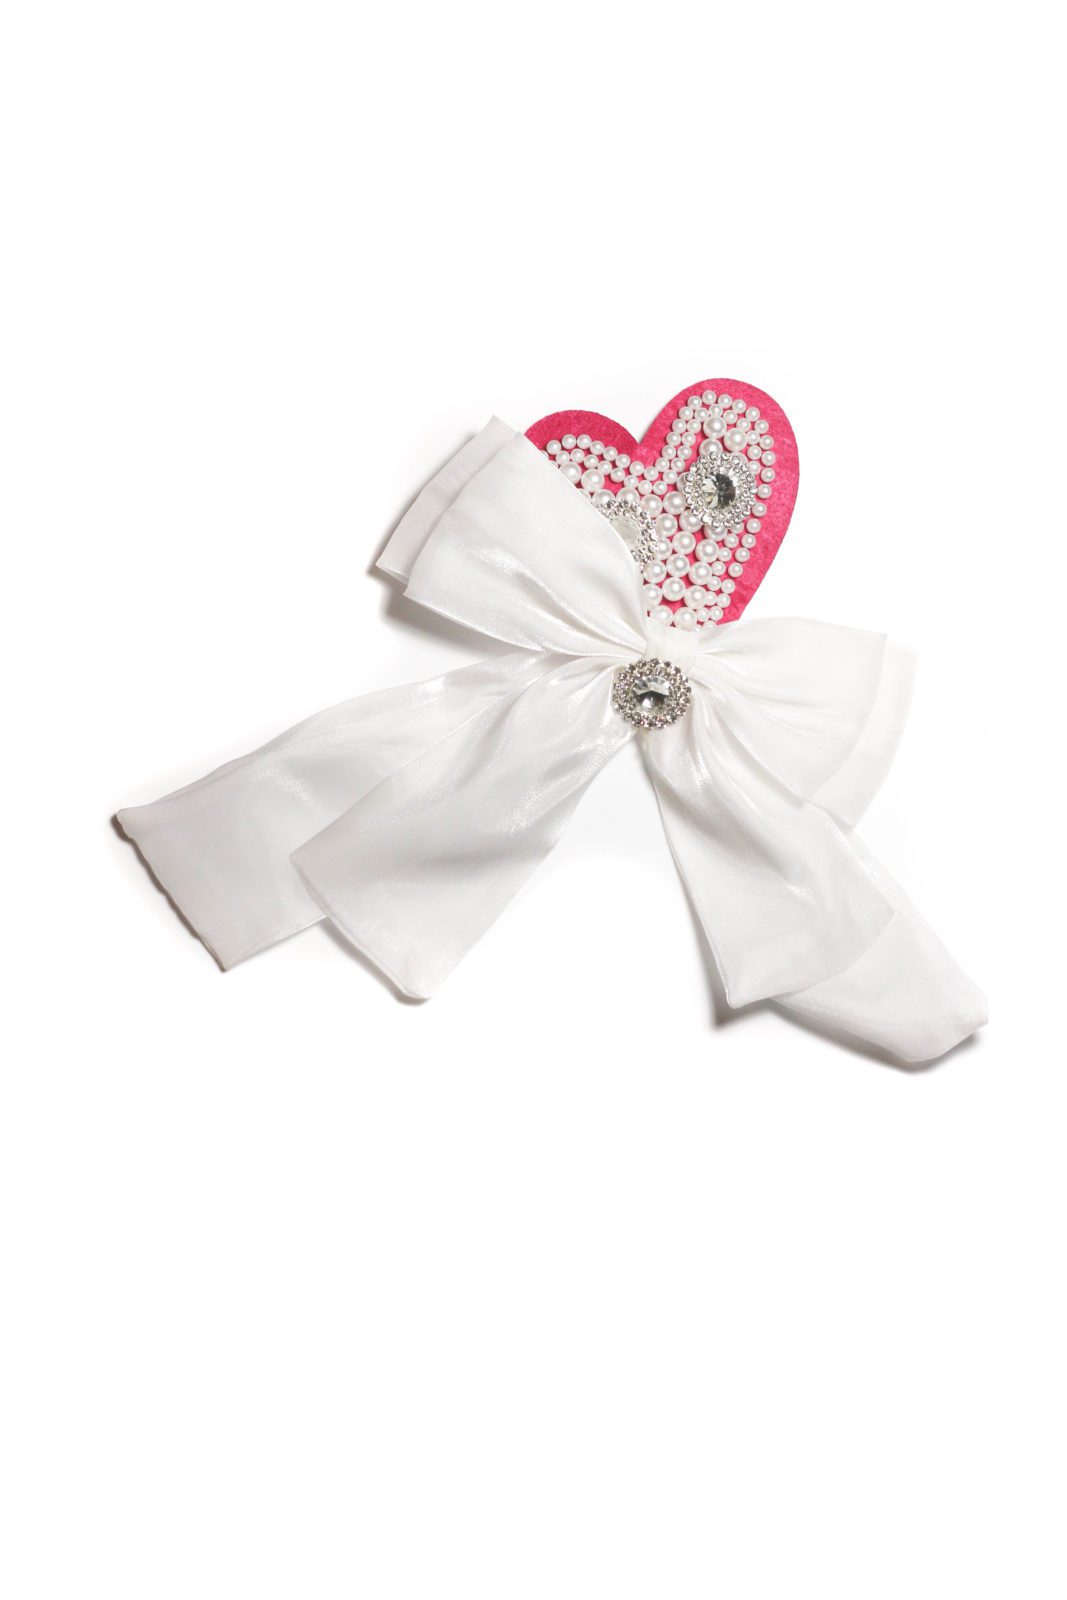 Heart Beaded white bow Sew on Patch